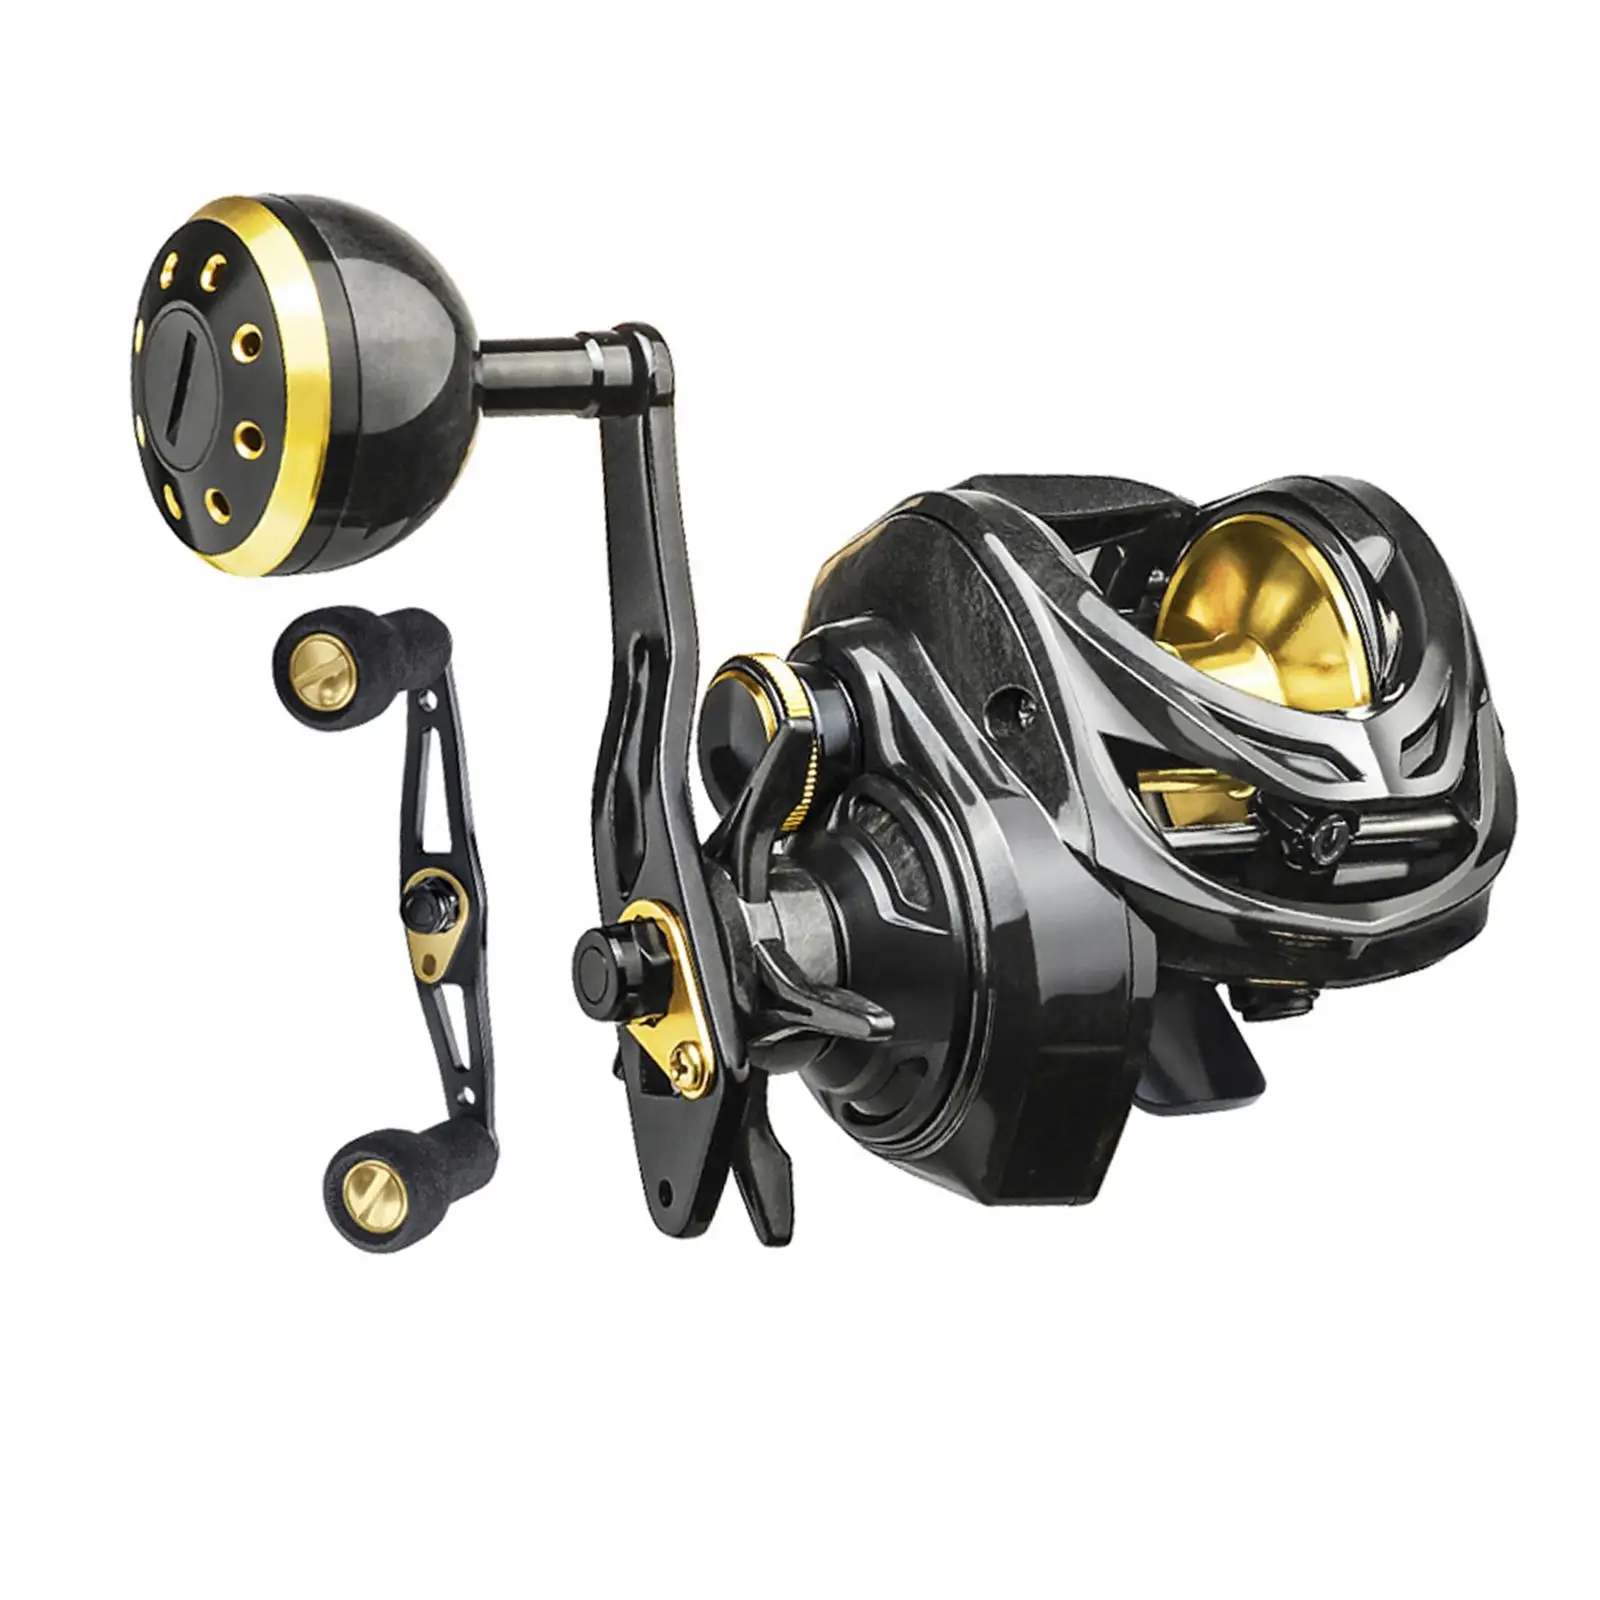 6.3:1 Gear Ratio 6+1BB Durable Comfortable Handle Compact Design Sealed Drag System Casting Reel Baitcaster Reel for Sea Fishing